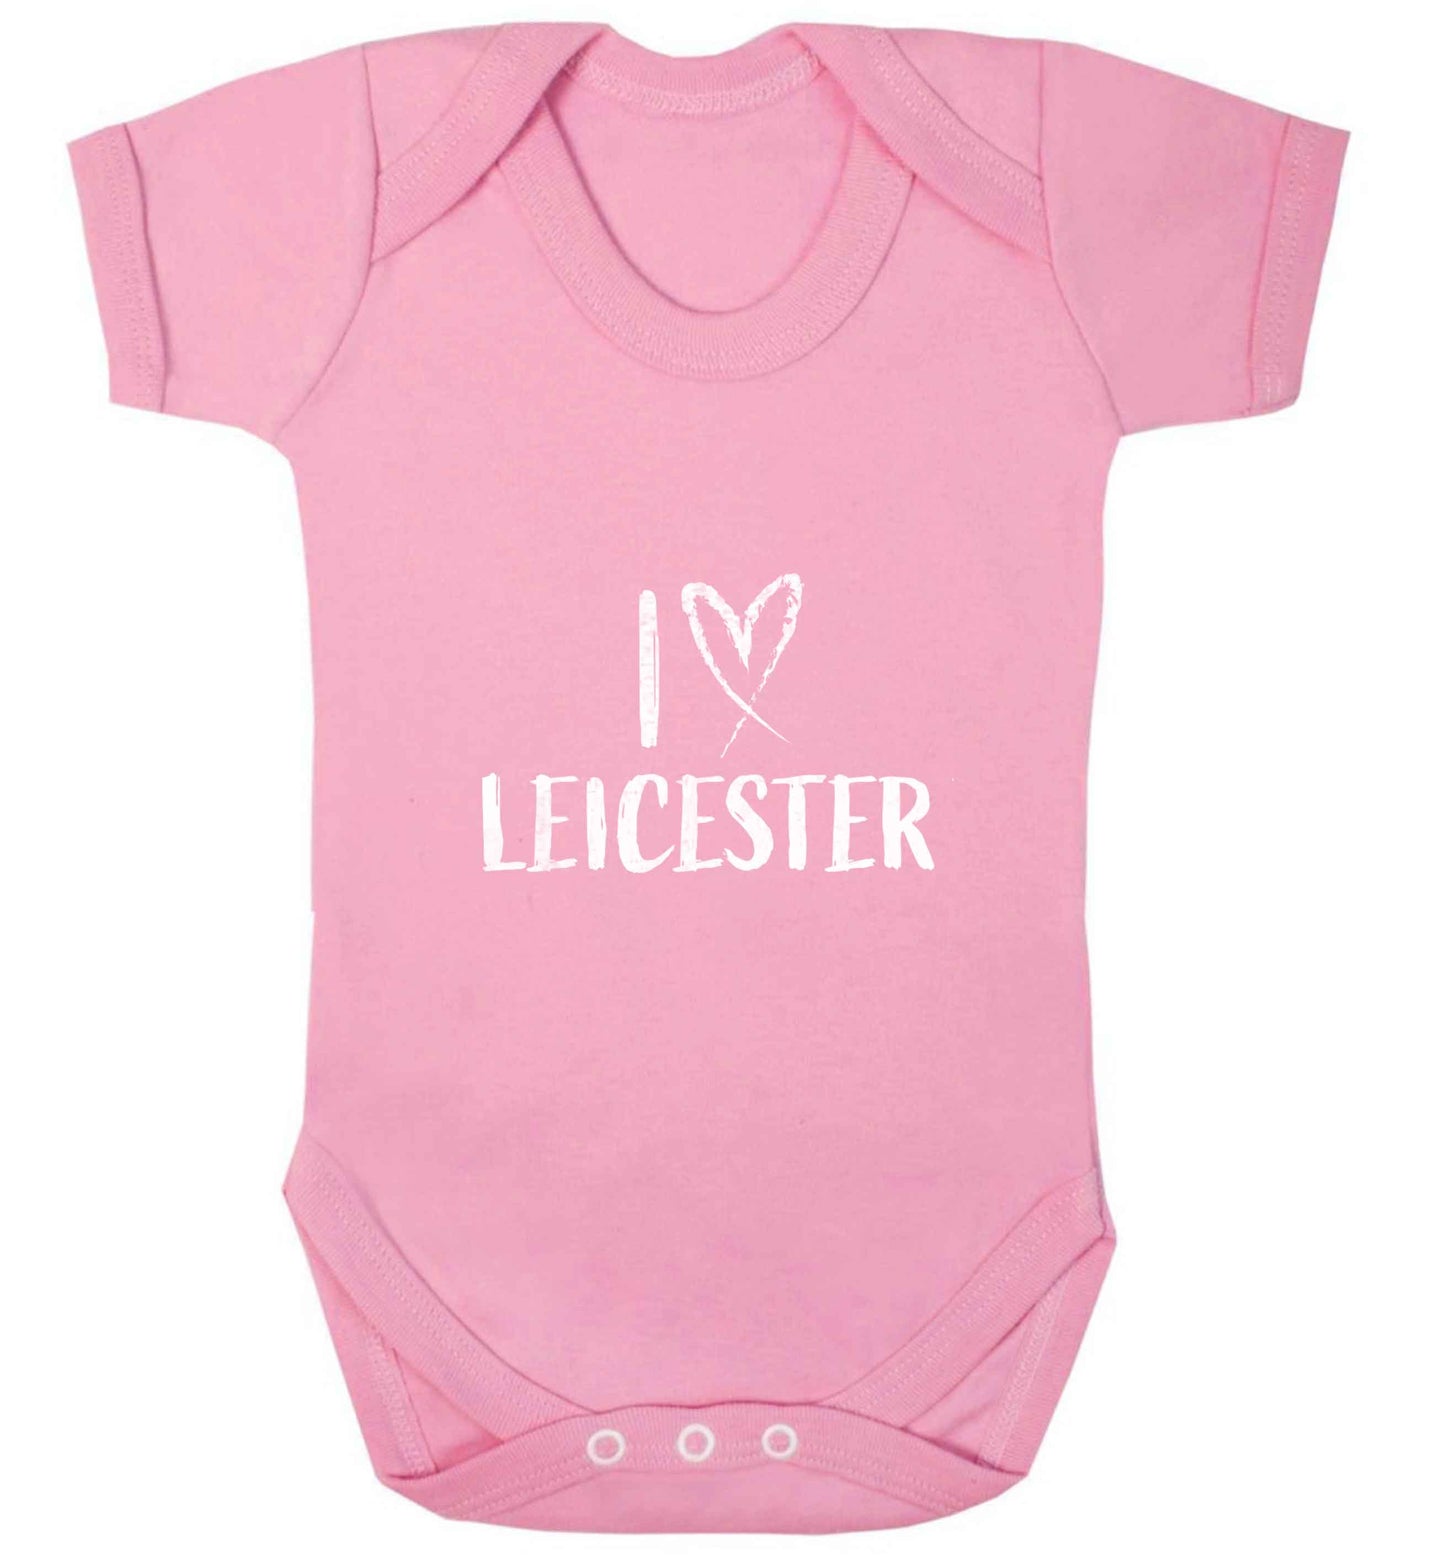 I love Leicester baby vest pale pink 18-24 months